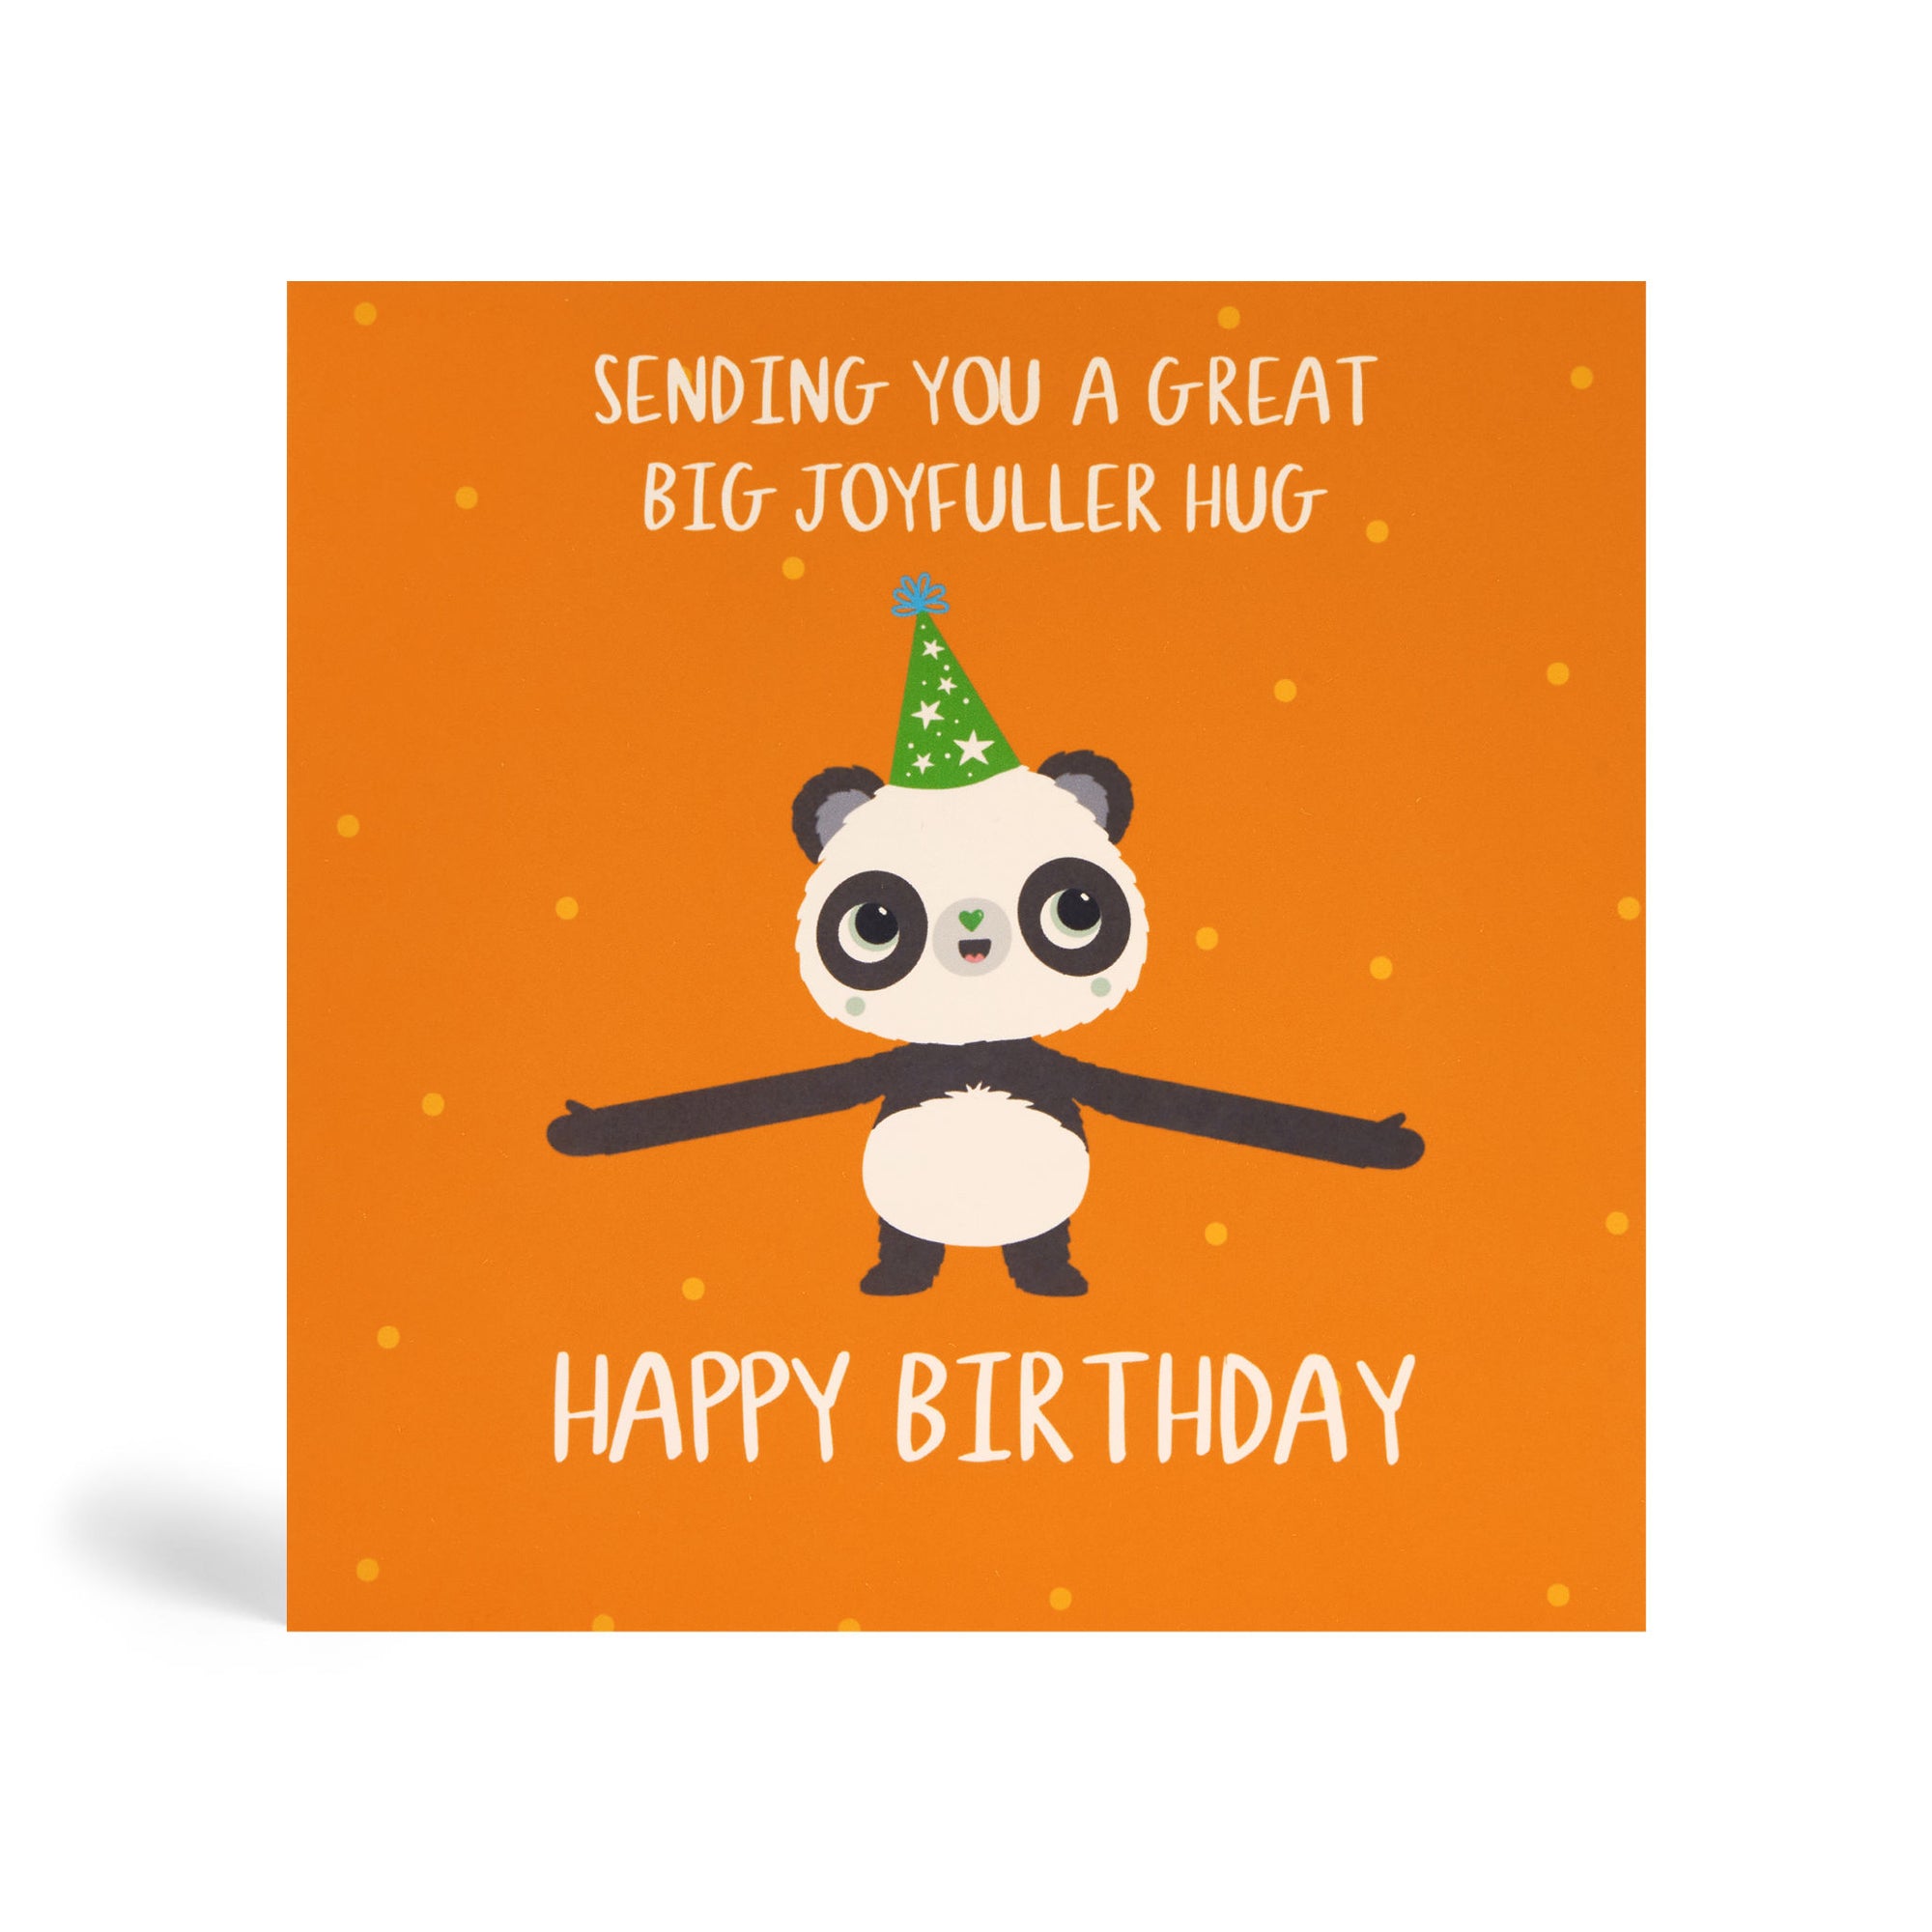 150mm square orange eco-friendly, tree free, birthday greeting card with dots in the background showing Panda opening hands and ready to give you a joyfuller big birthday hug. The card says, Sending you a great big joyfuller hug. Happy Birthday.